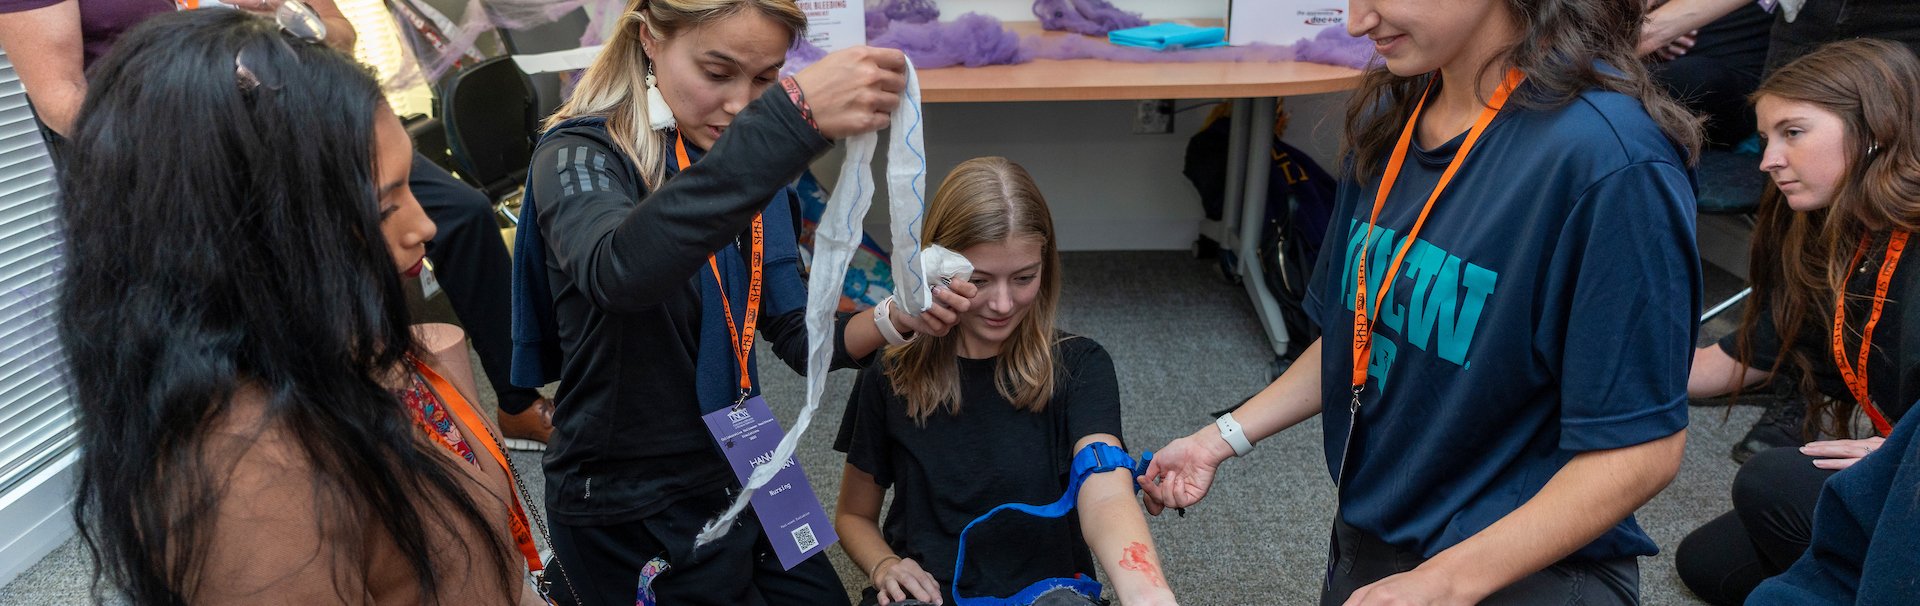 Several girls simulating a bleeding arm and treatment